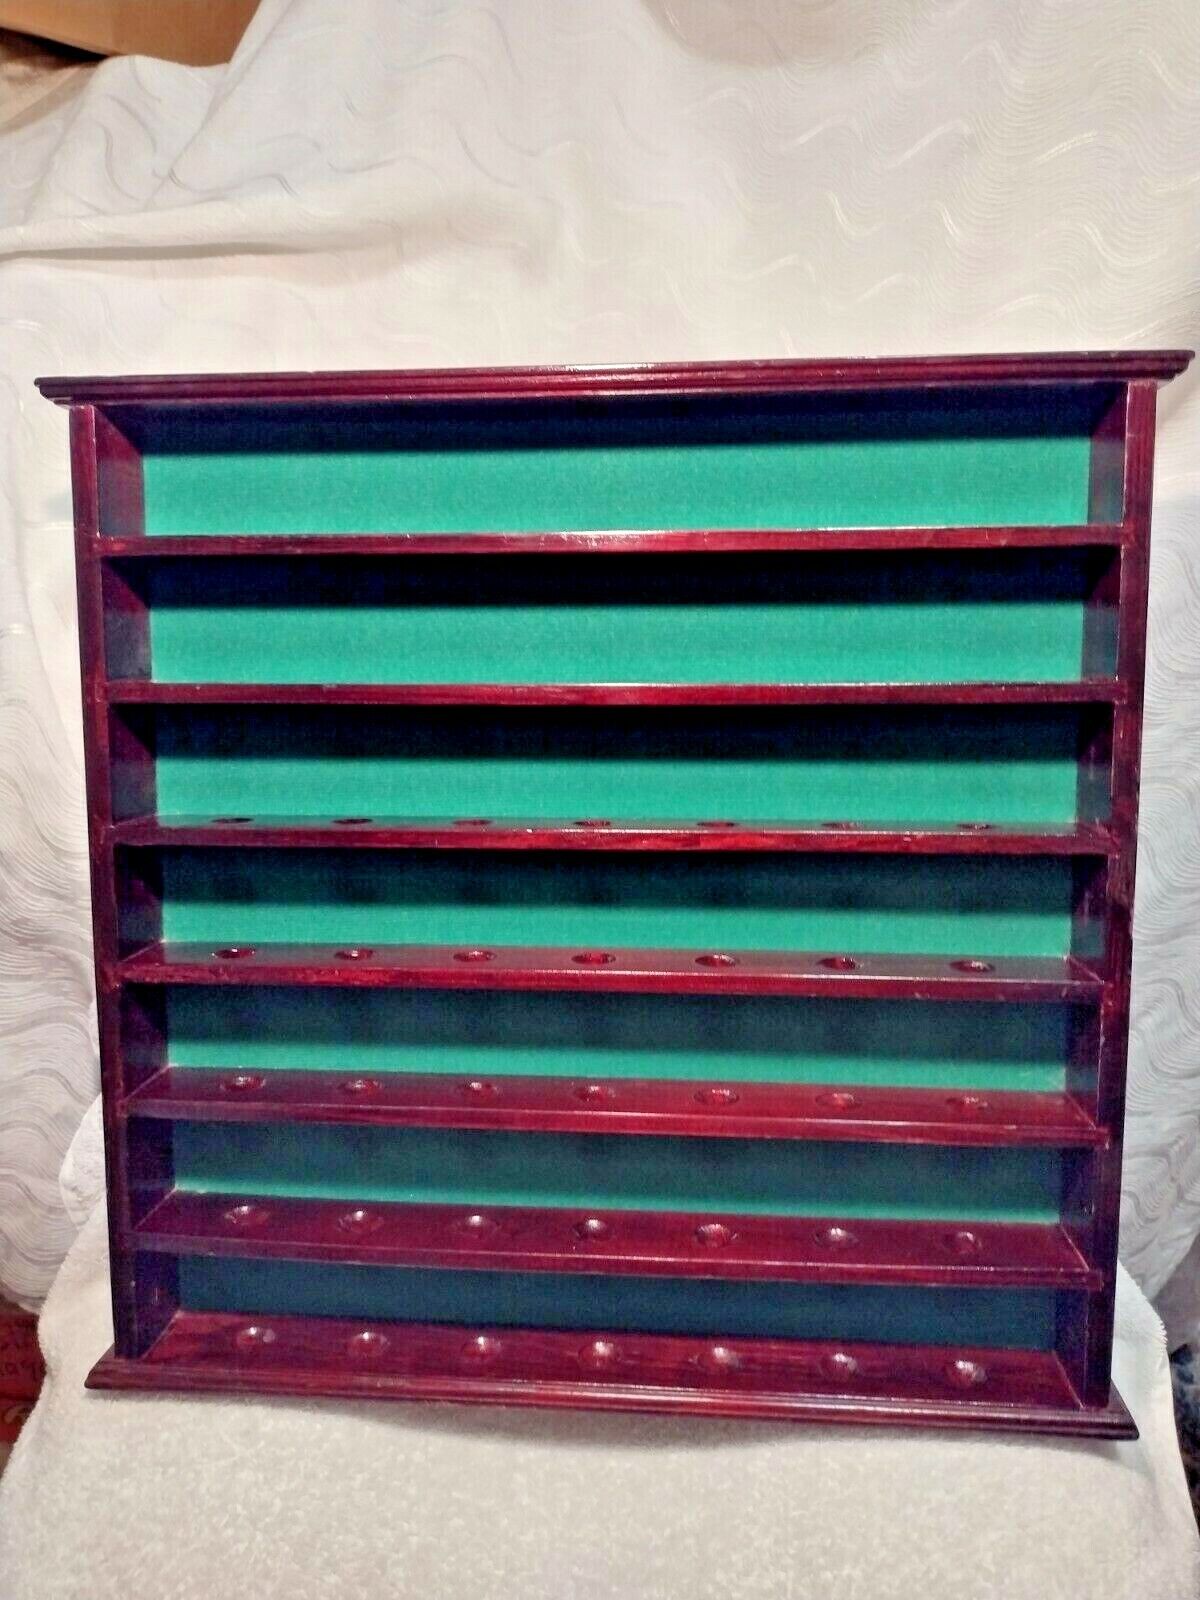 WOOD HANDCRAFTED GOLF BALLS DISPLAY WALL CASE